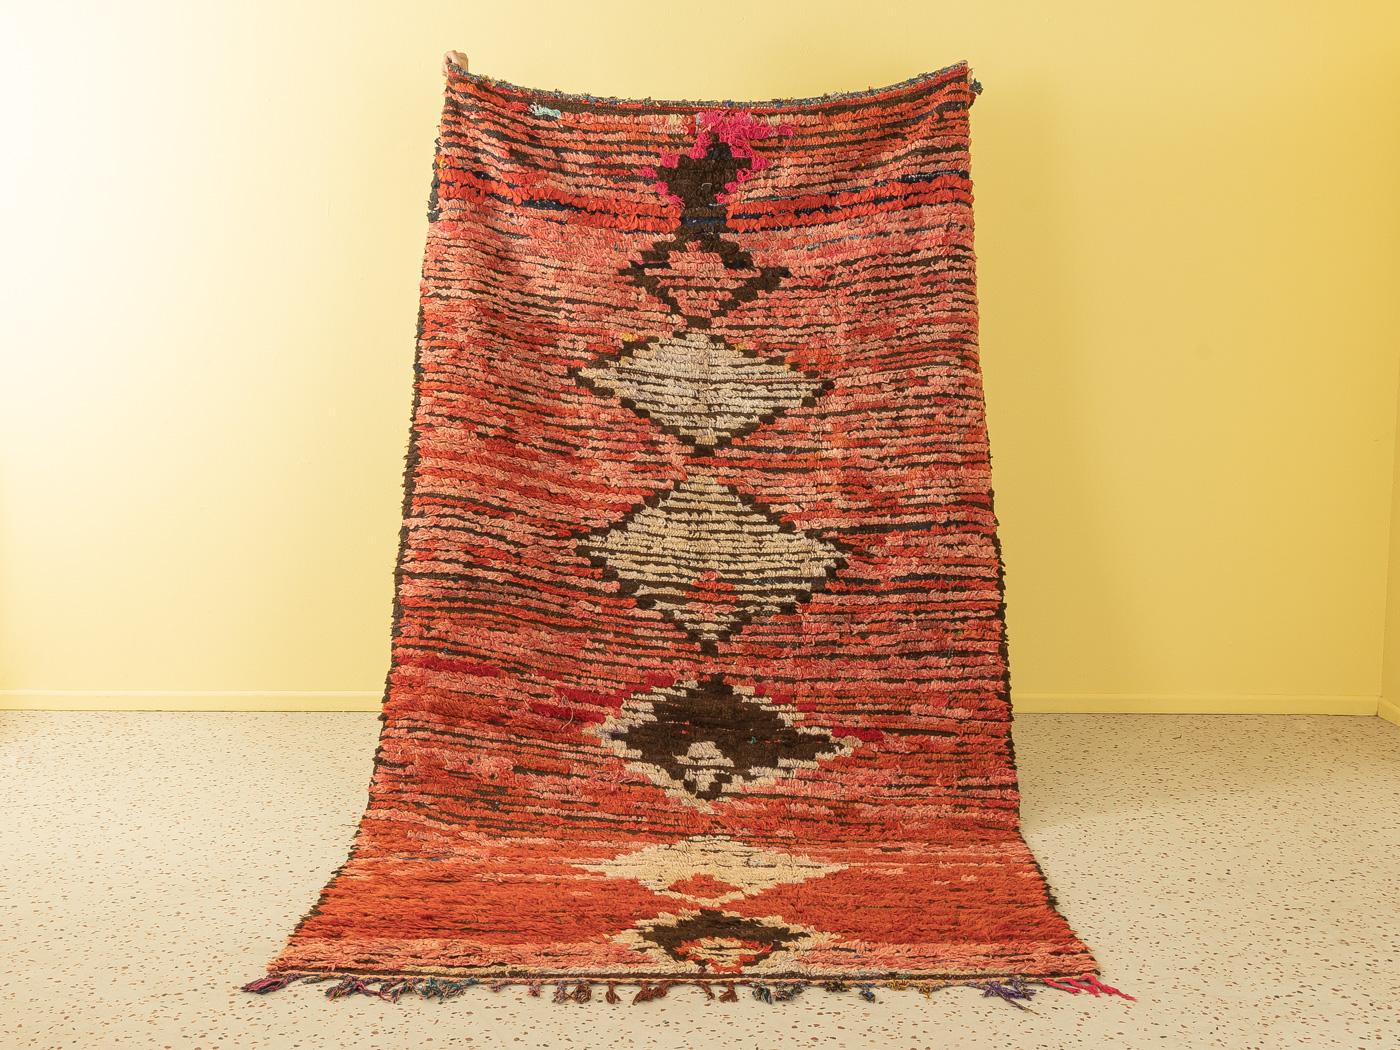 This Rehamna is a vintage wool rug with some recycled wool parts – soft and comfortable underfoot. Our Berber rugs are handmade, one knot at a time. Each of our Berber rugs is a long-lasting one-of-a-kind piece, created in a sustainable manner with